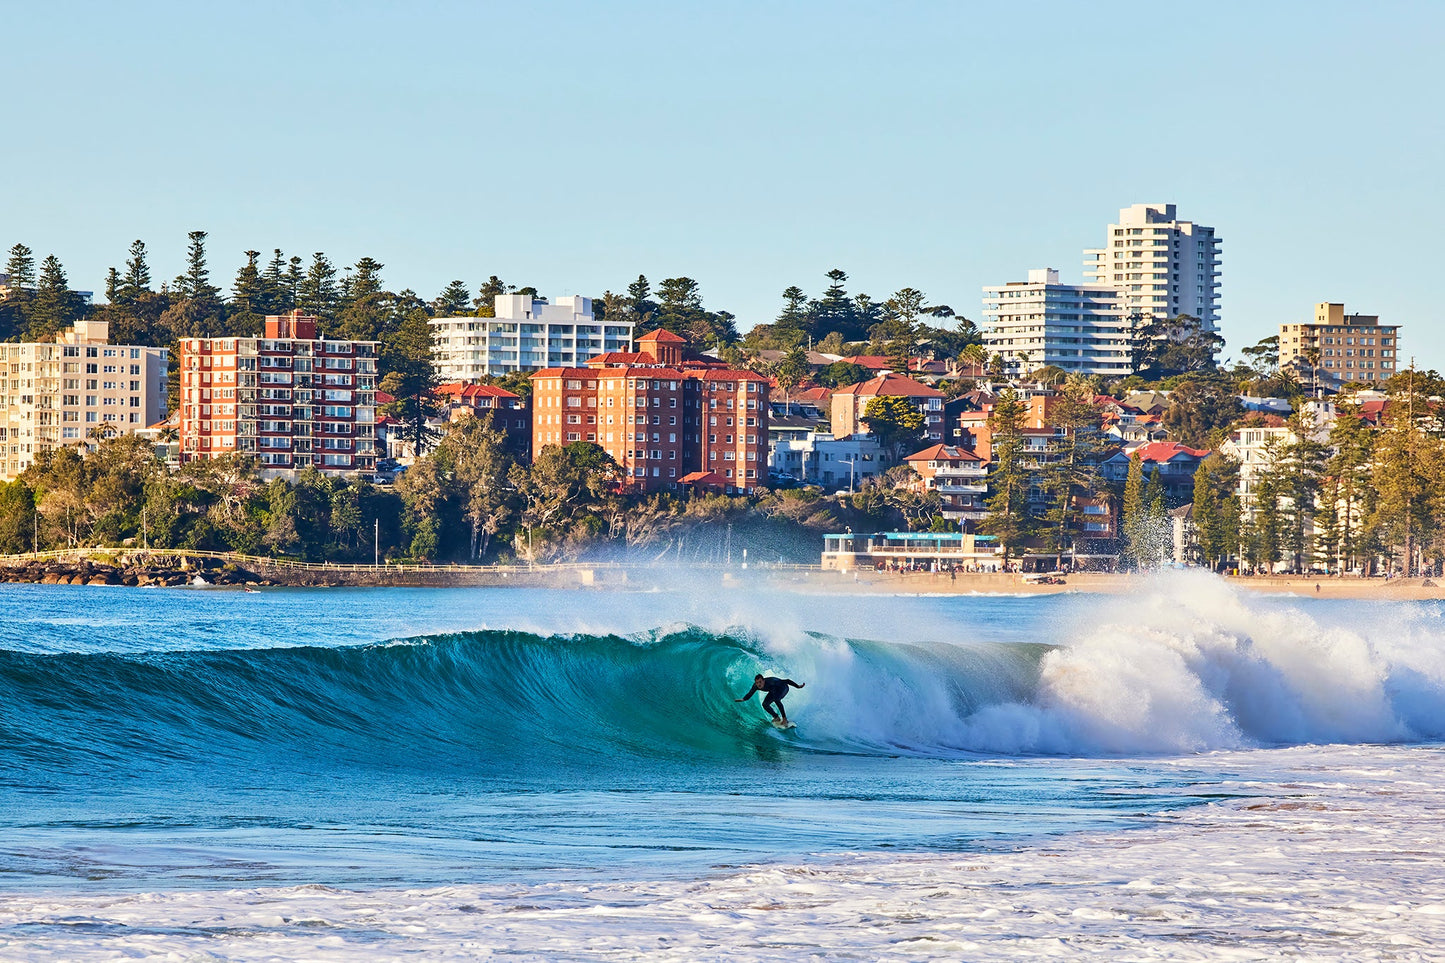 Inside the greenroom - Surfing at Manly Beach, Sydney